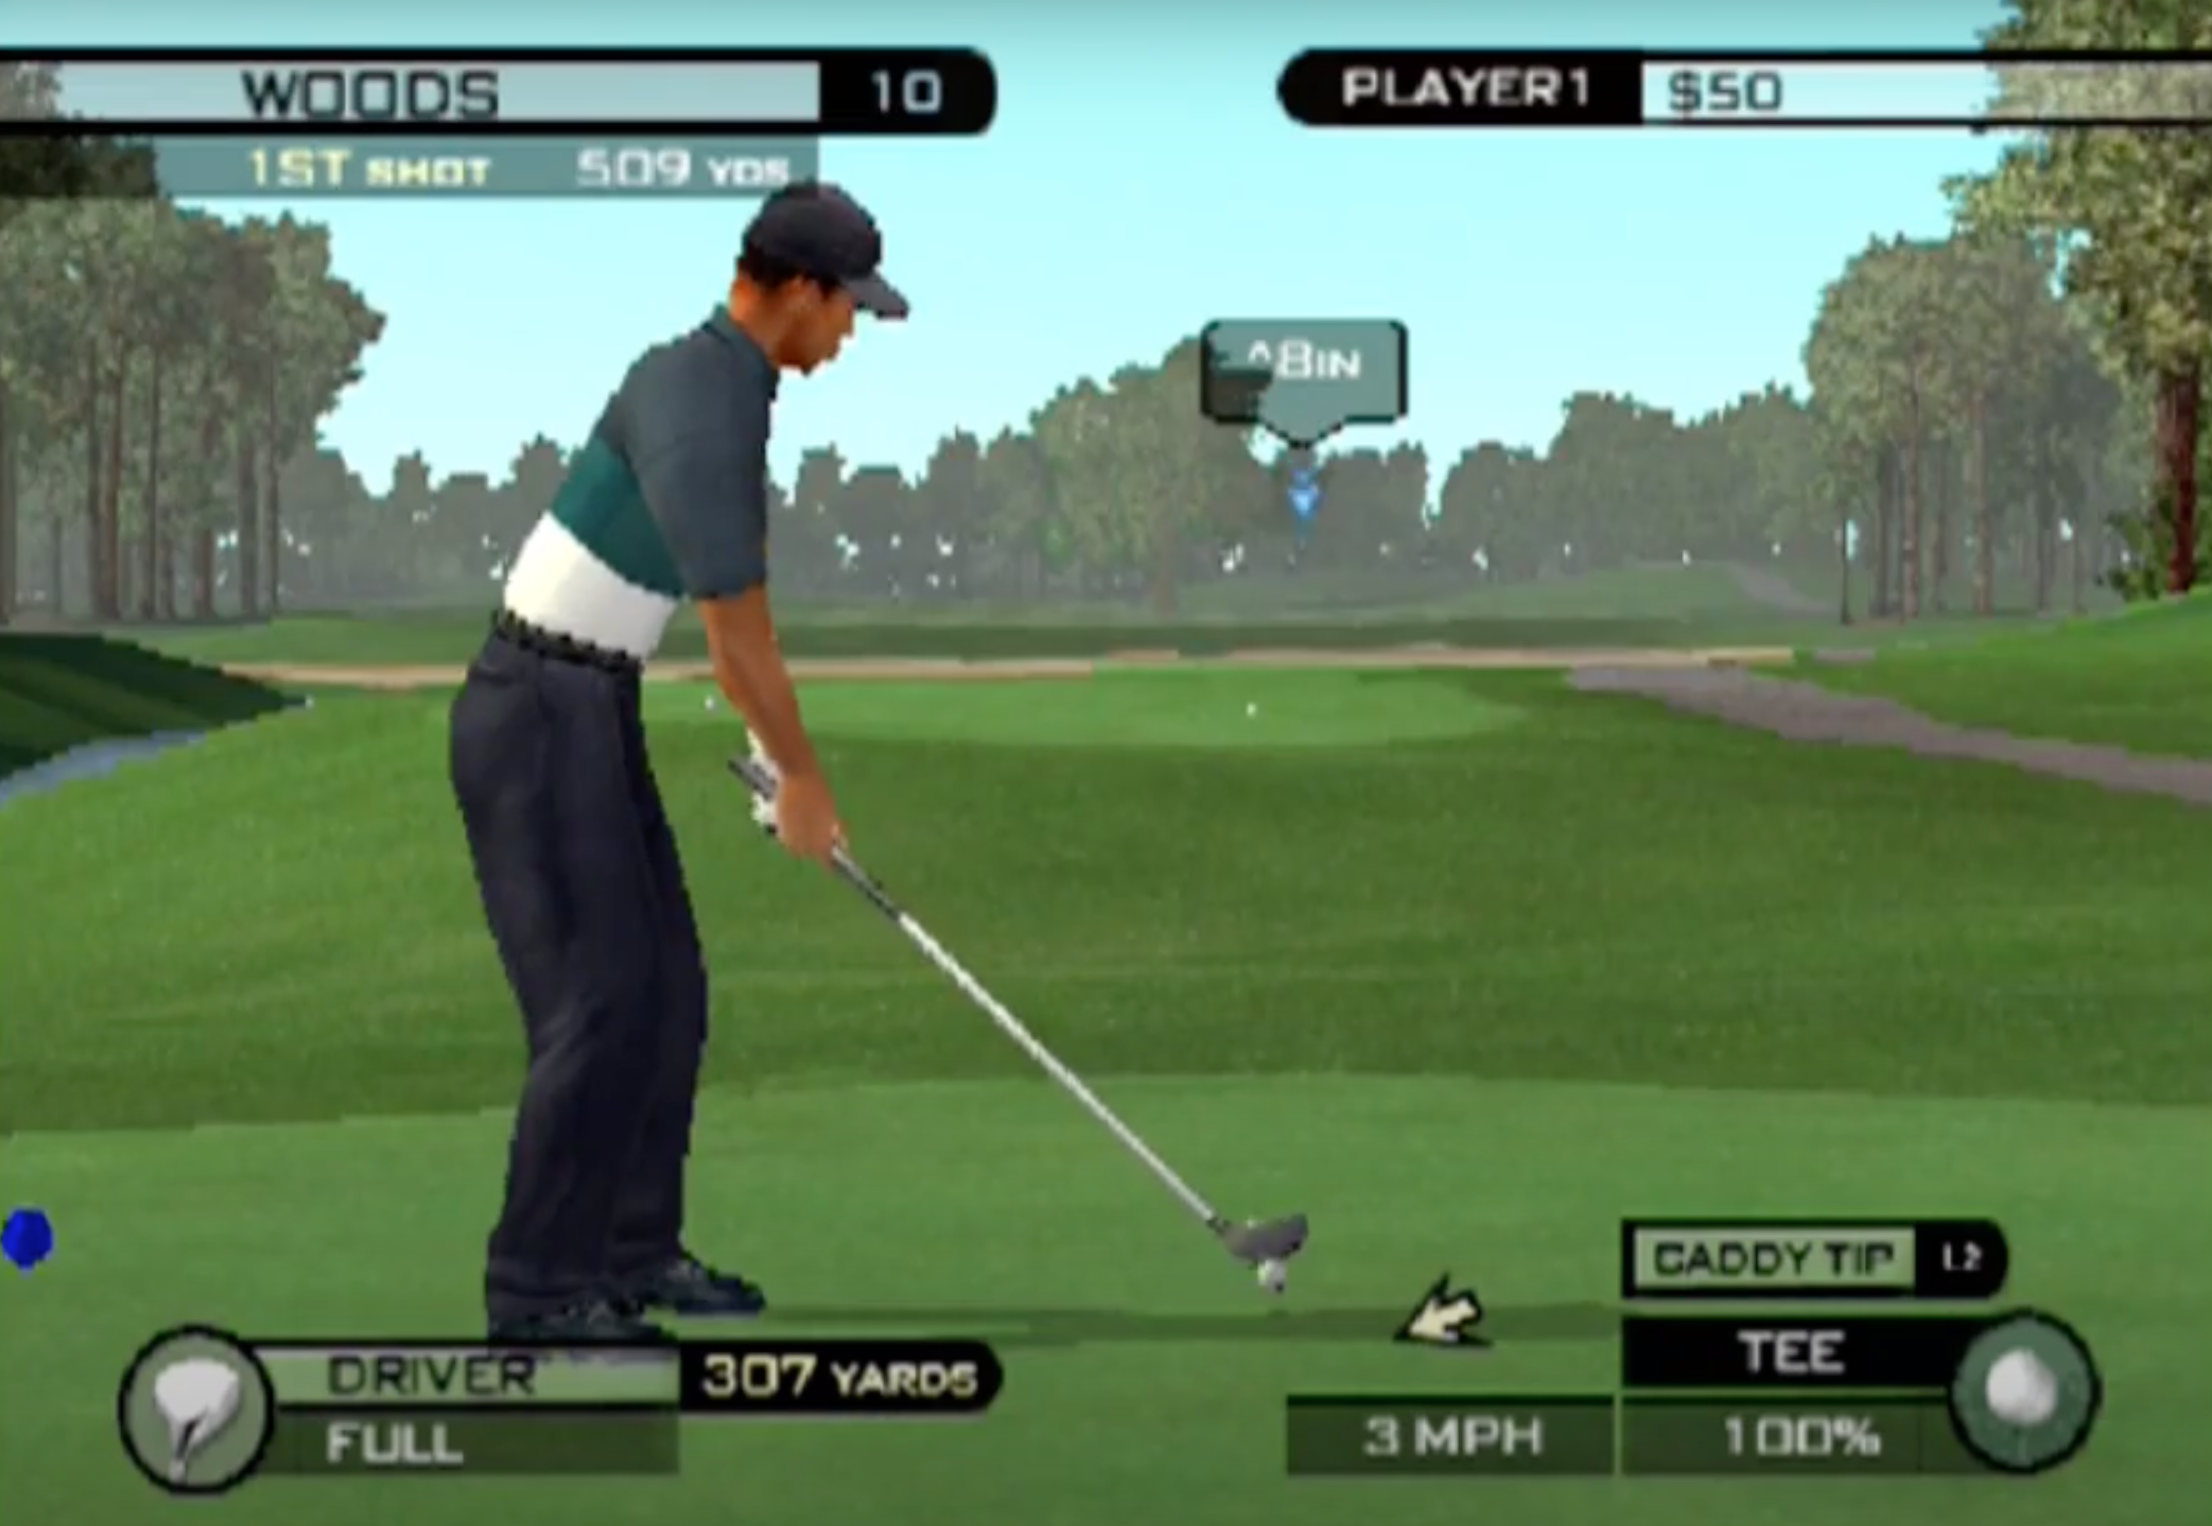 how to change your avatar on tiger woods pga tour 2003 ps2